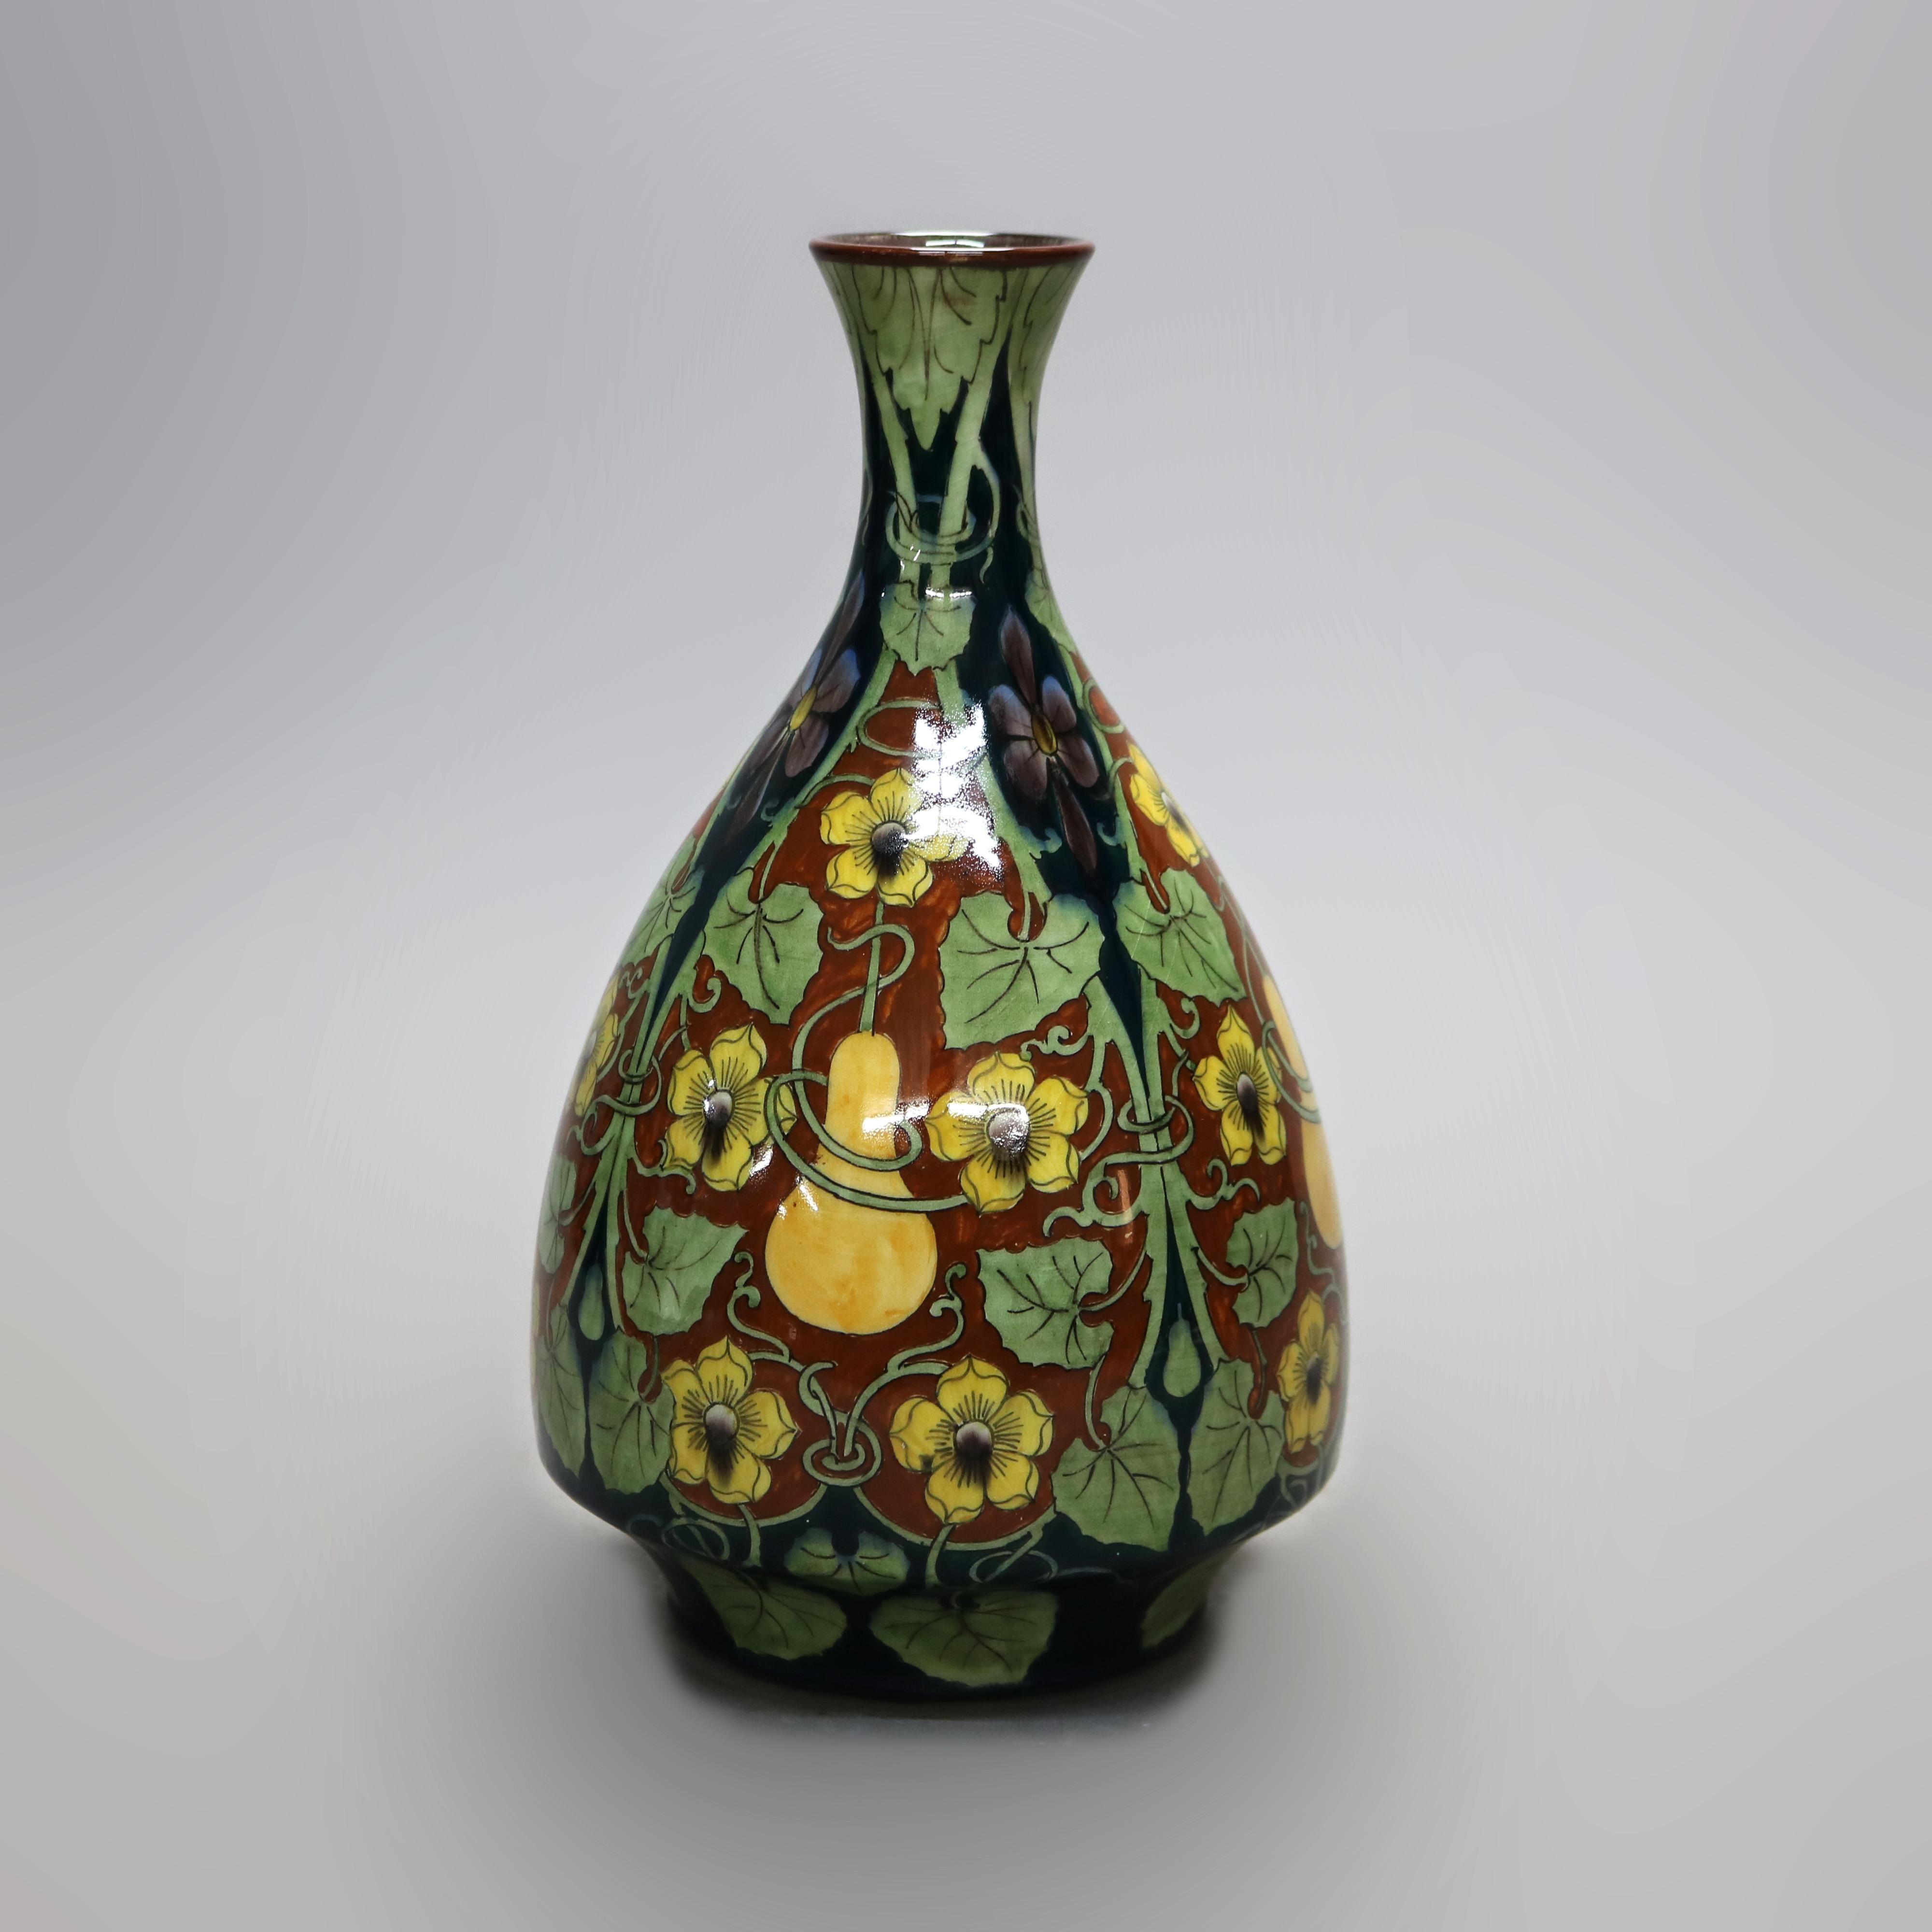 An antique French Luneville Aesthetic vase offers faience pottery construction in bulbous form with hand painted garden decoration having gourd and vine, maker stamped on base as photographed, 19th century

Measures- 12.25''H X 6.75''W X